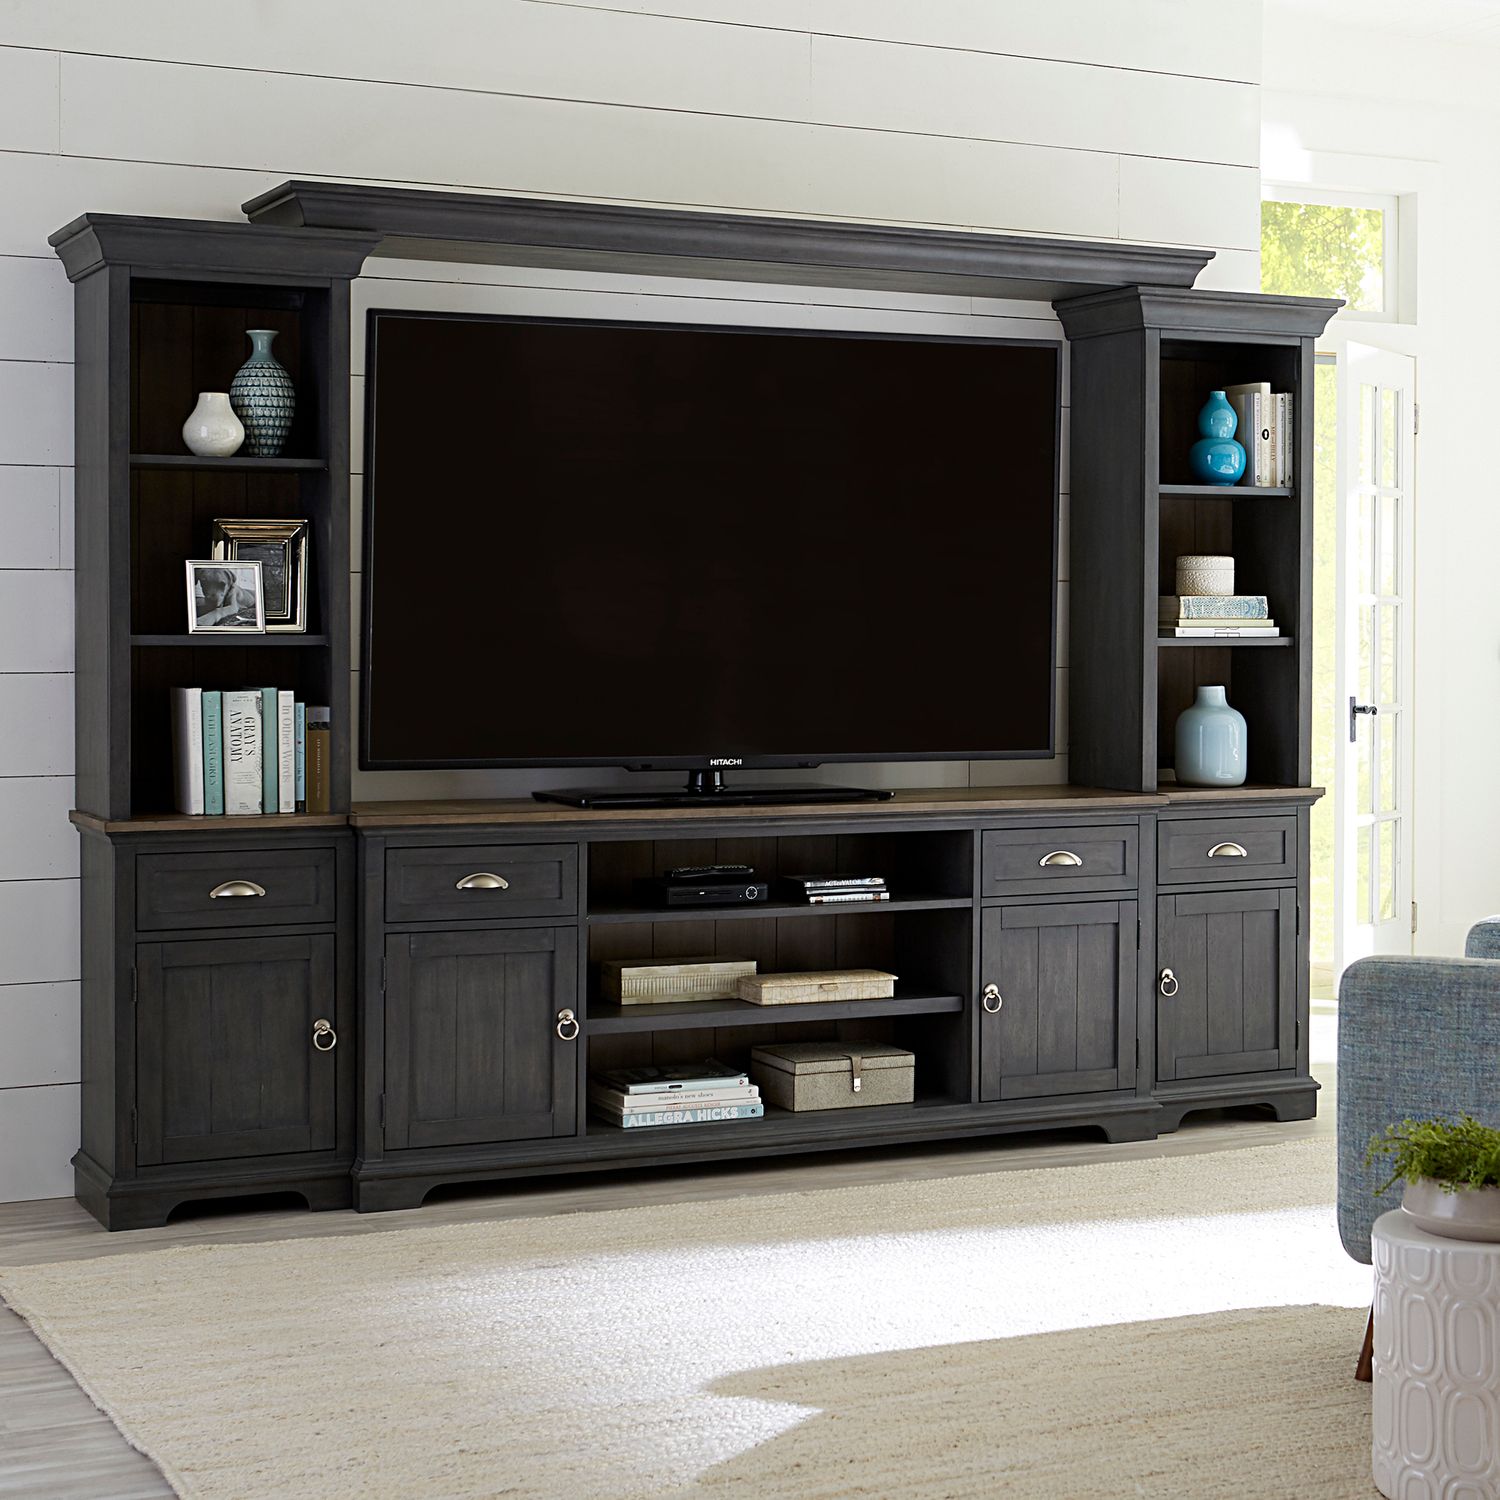 Infiniti Slate Weathered Pine Entertainment Center with Piers